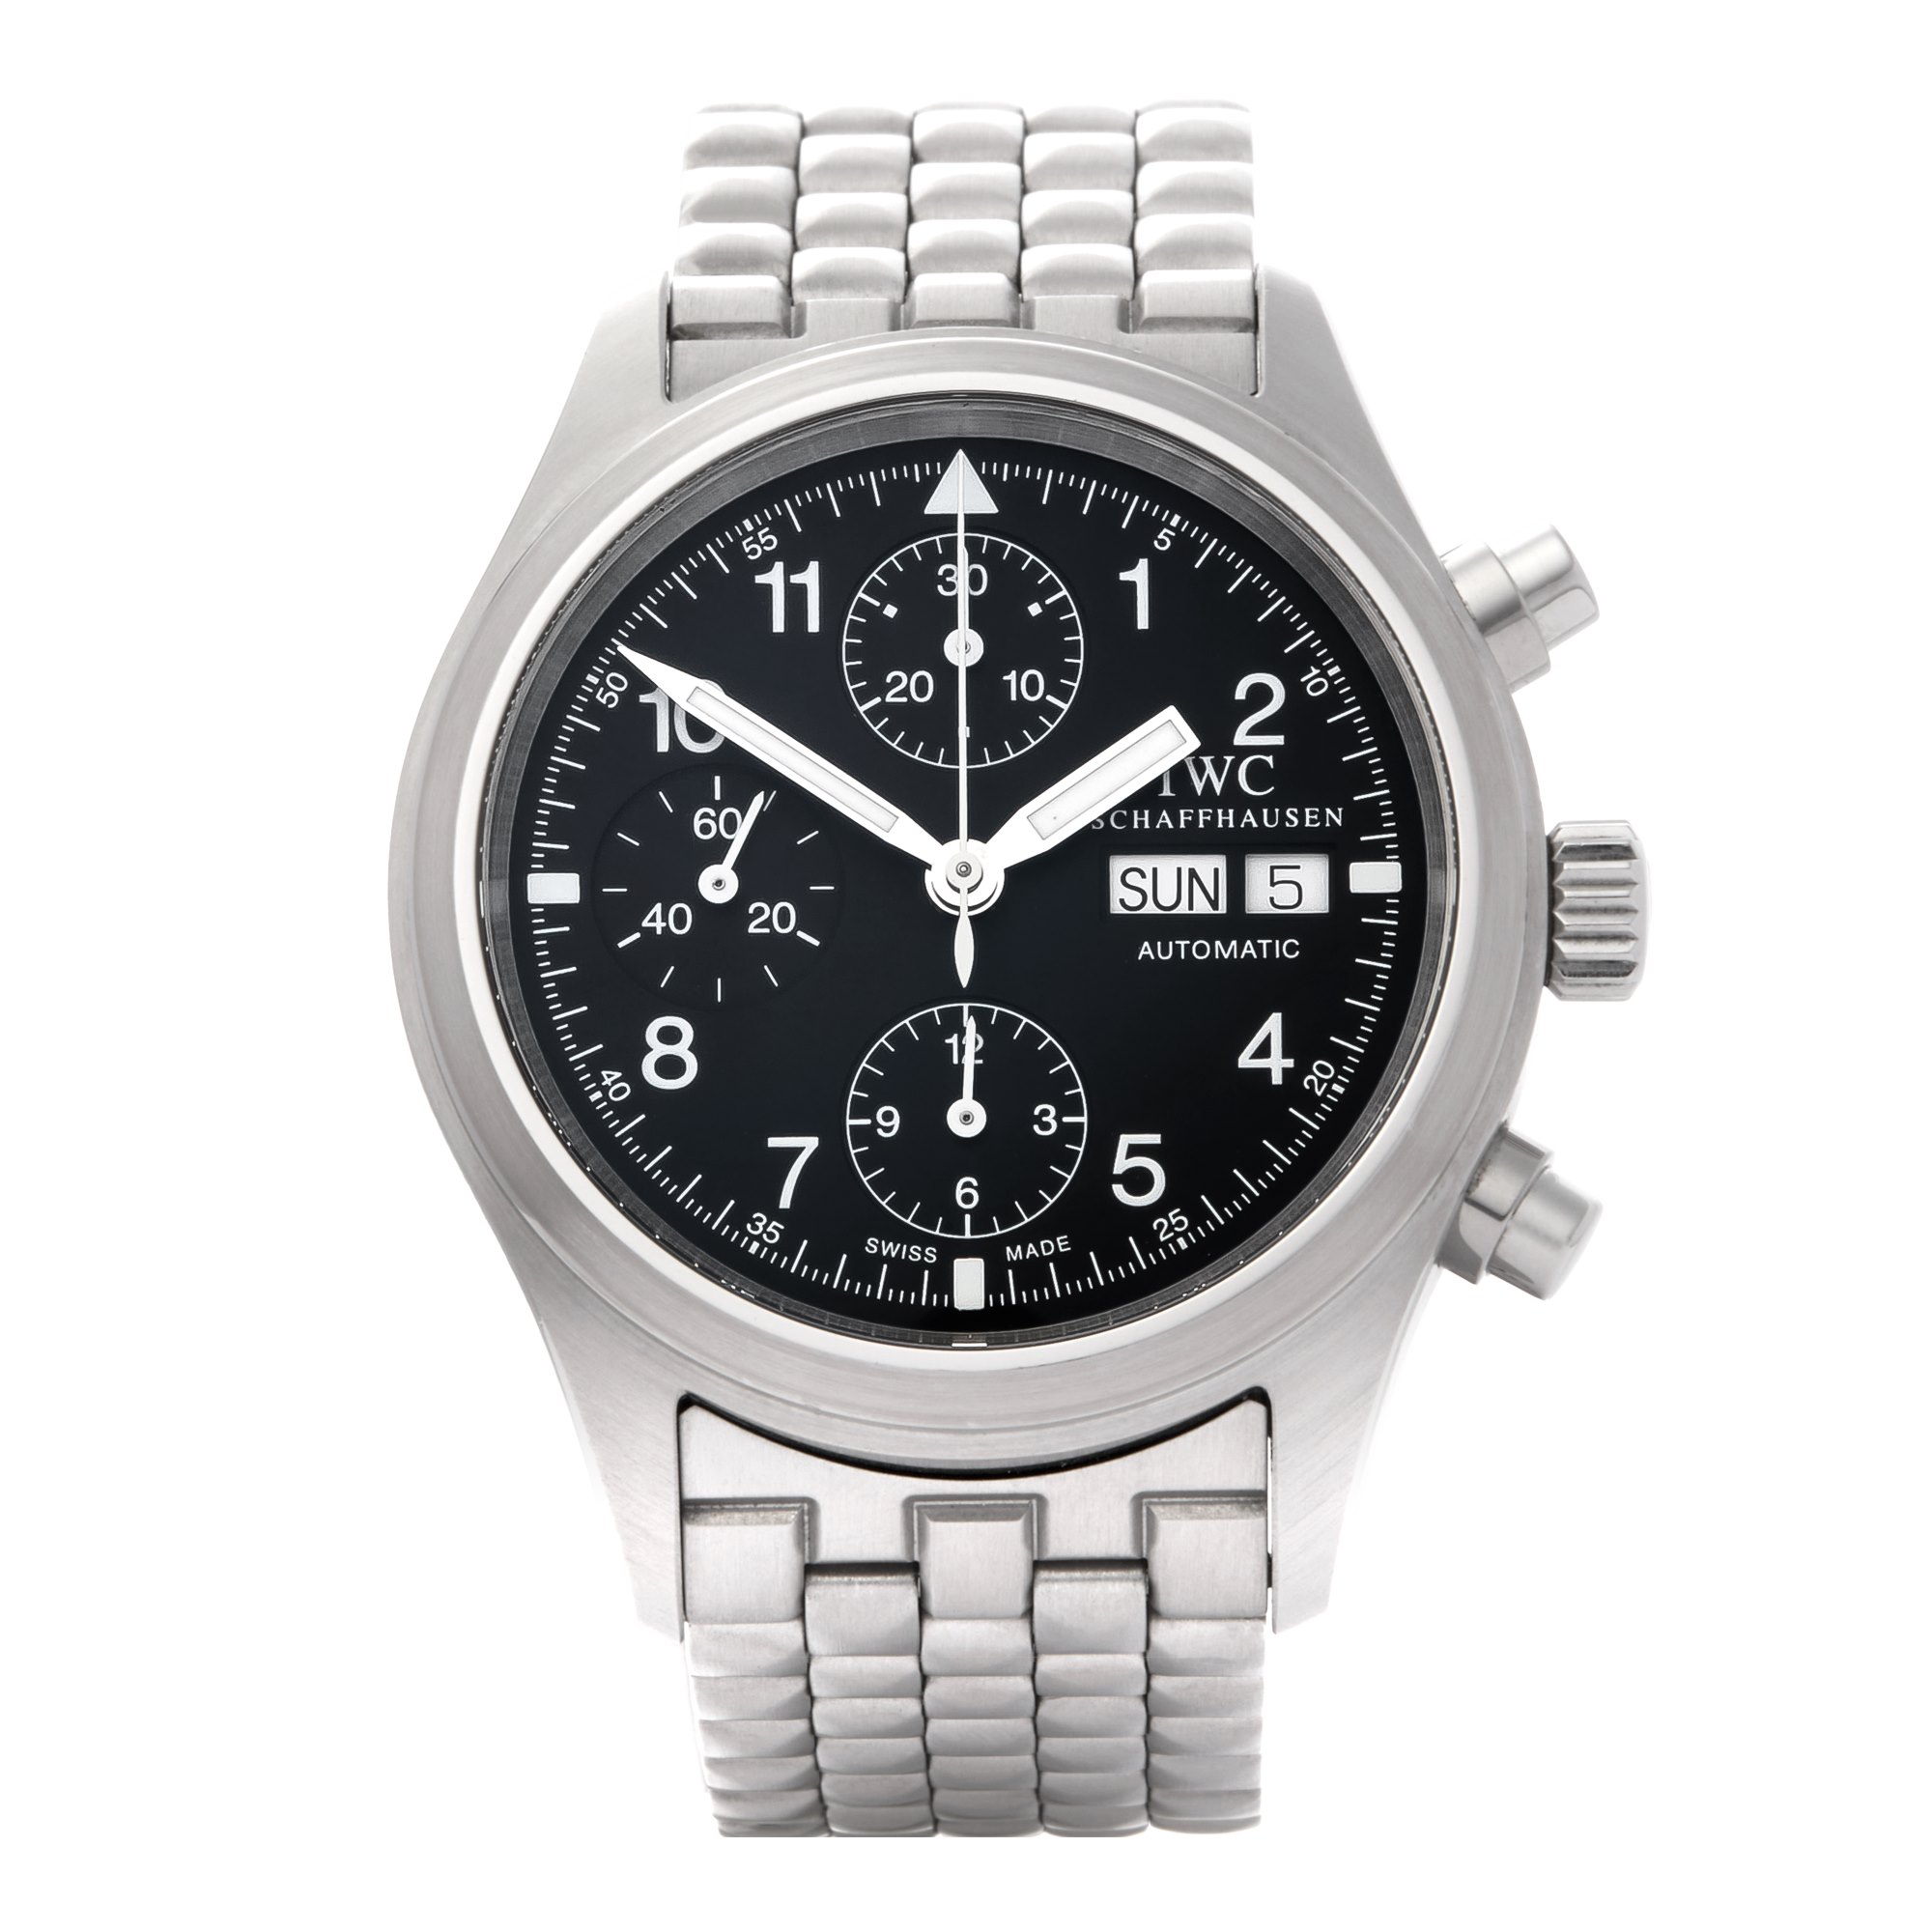 IWC Pilot Flieger Chronograph Stainless Steel IW370607